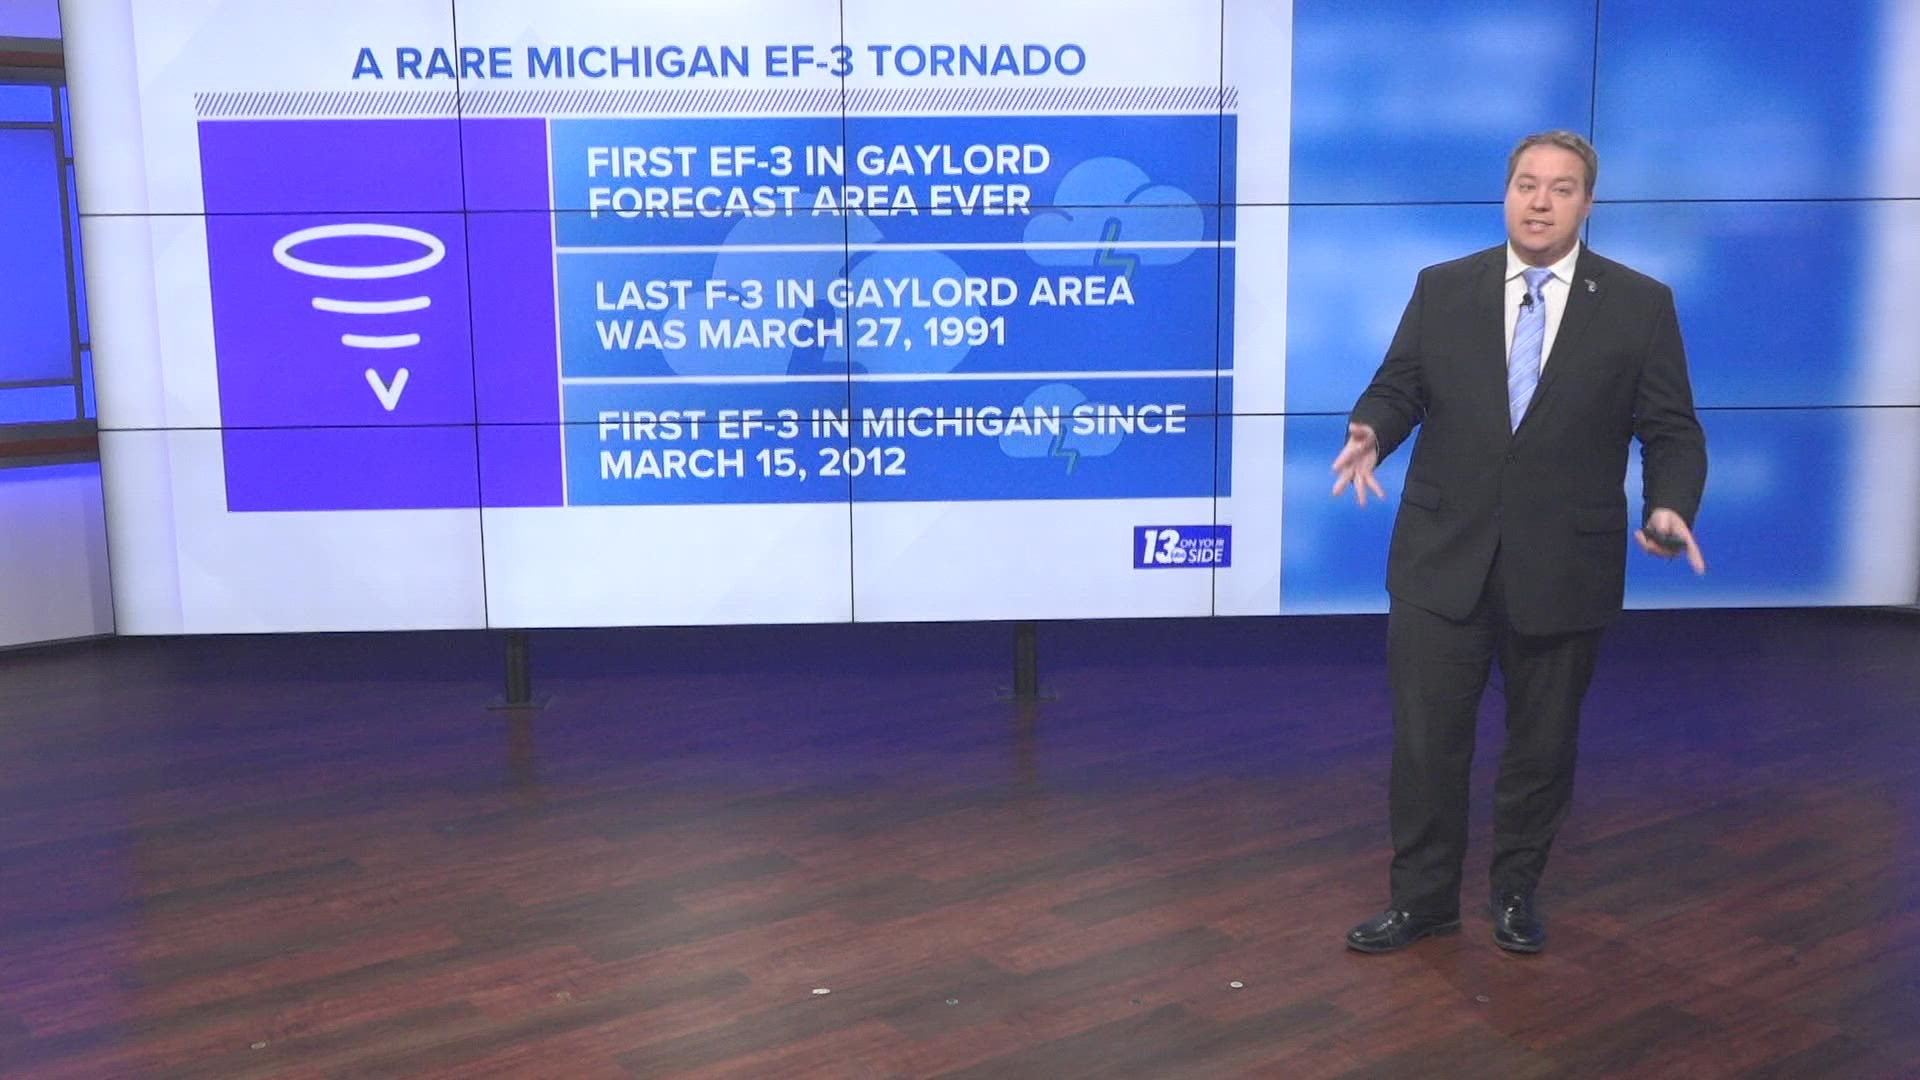 It's rare for Michigan to see an EF-3 or stronger tornado. Meteorologist Michael Behrens explains why!